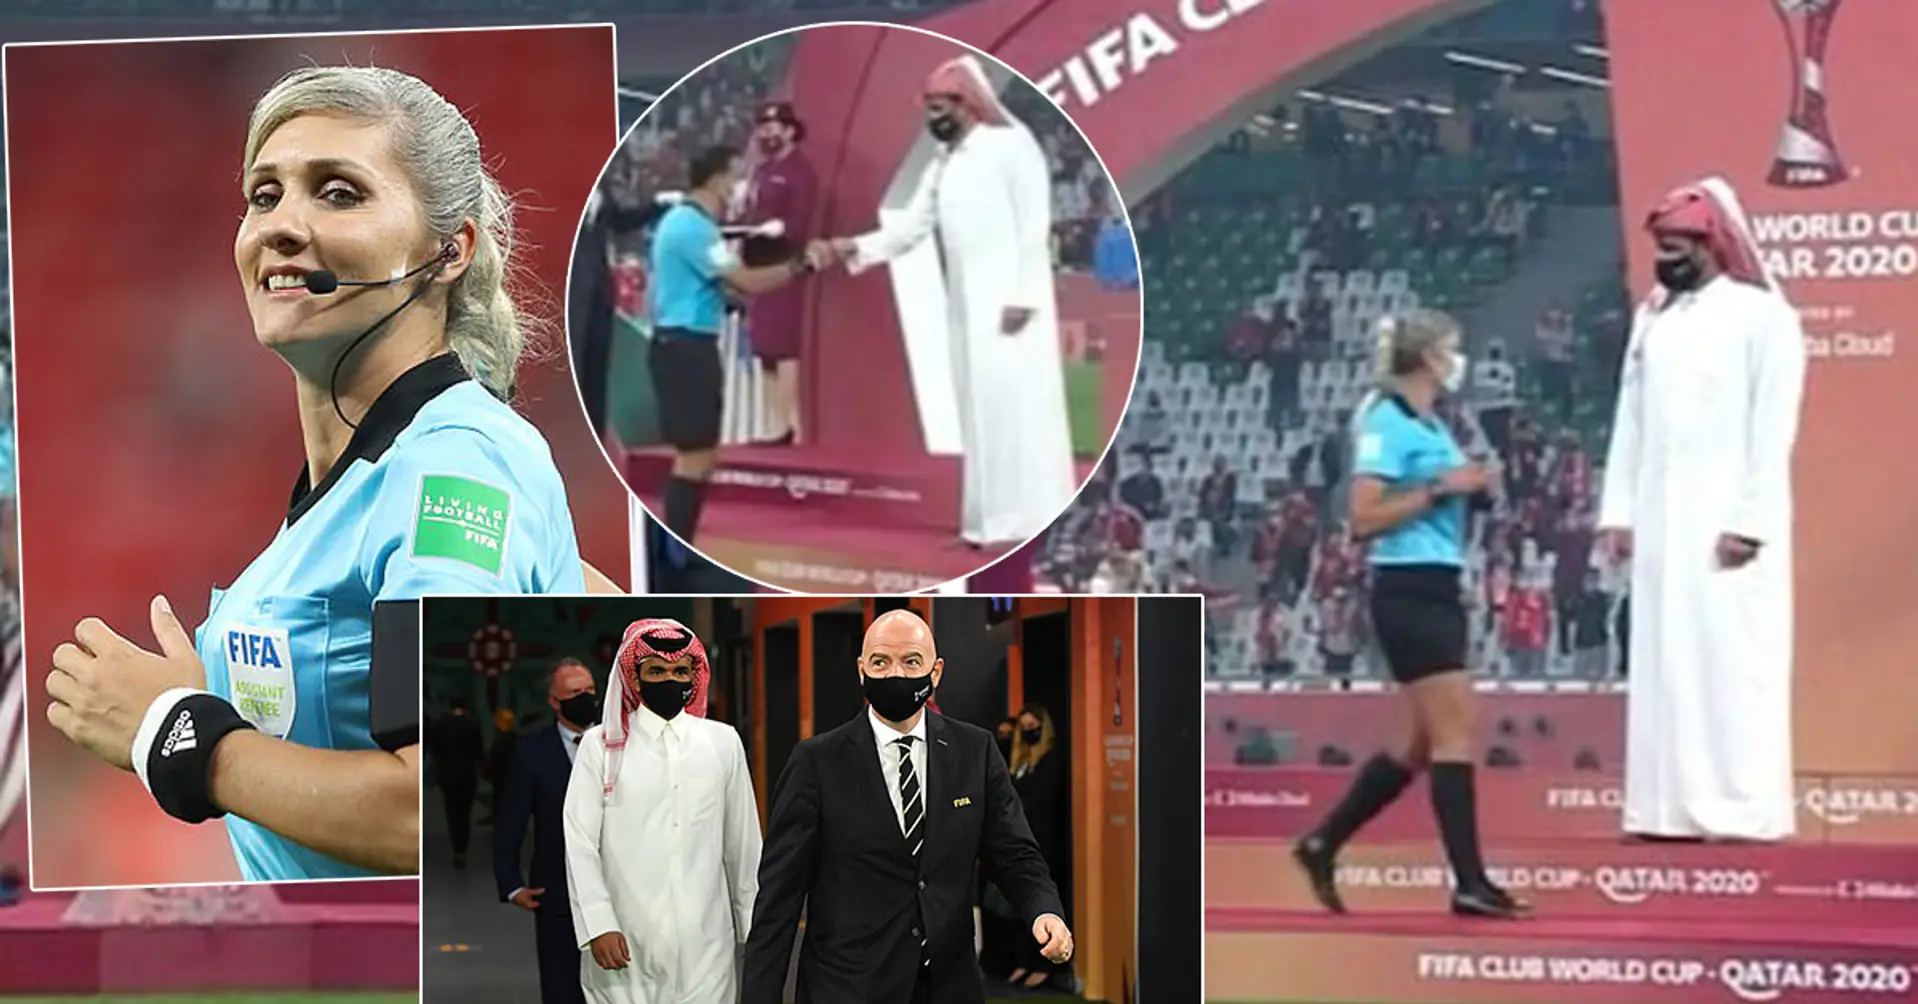 Caught on camera: Qatar Sheikh refuses to shake hands with female referee after Bayern win and ignores her